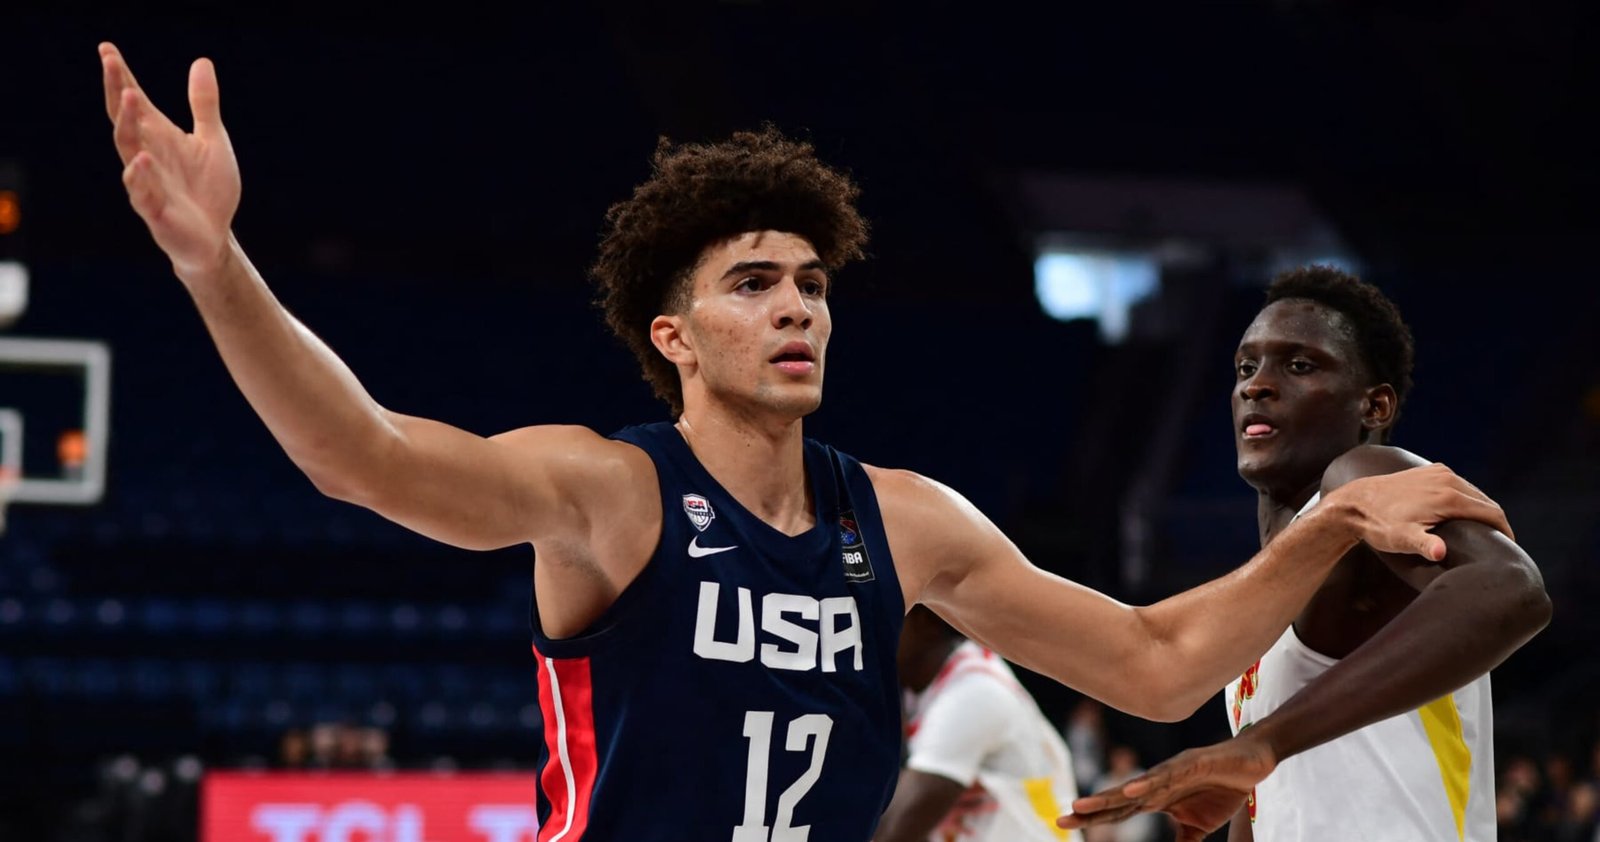 Video: Cameron Boozer Leads Group USA to Historic Win vs. Philippines at U17 World Cup